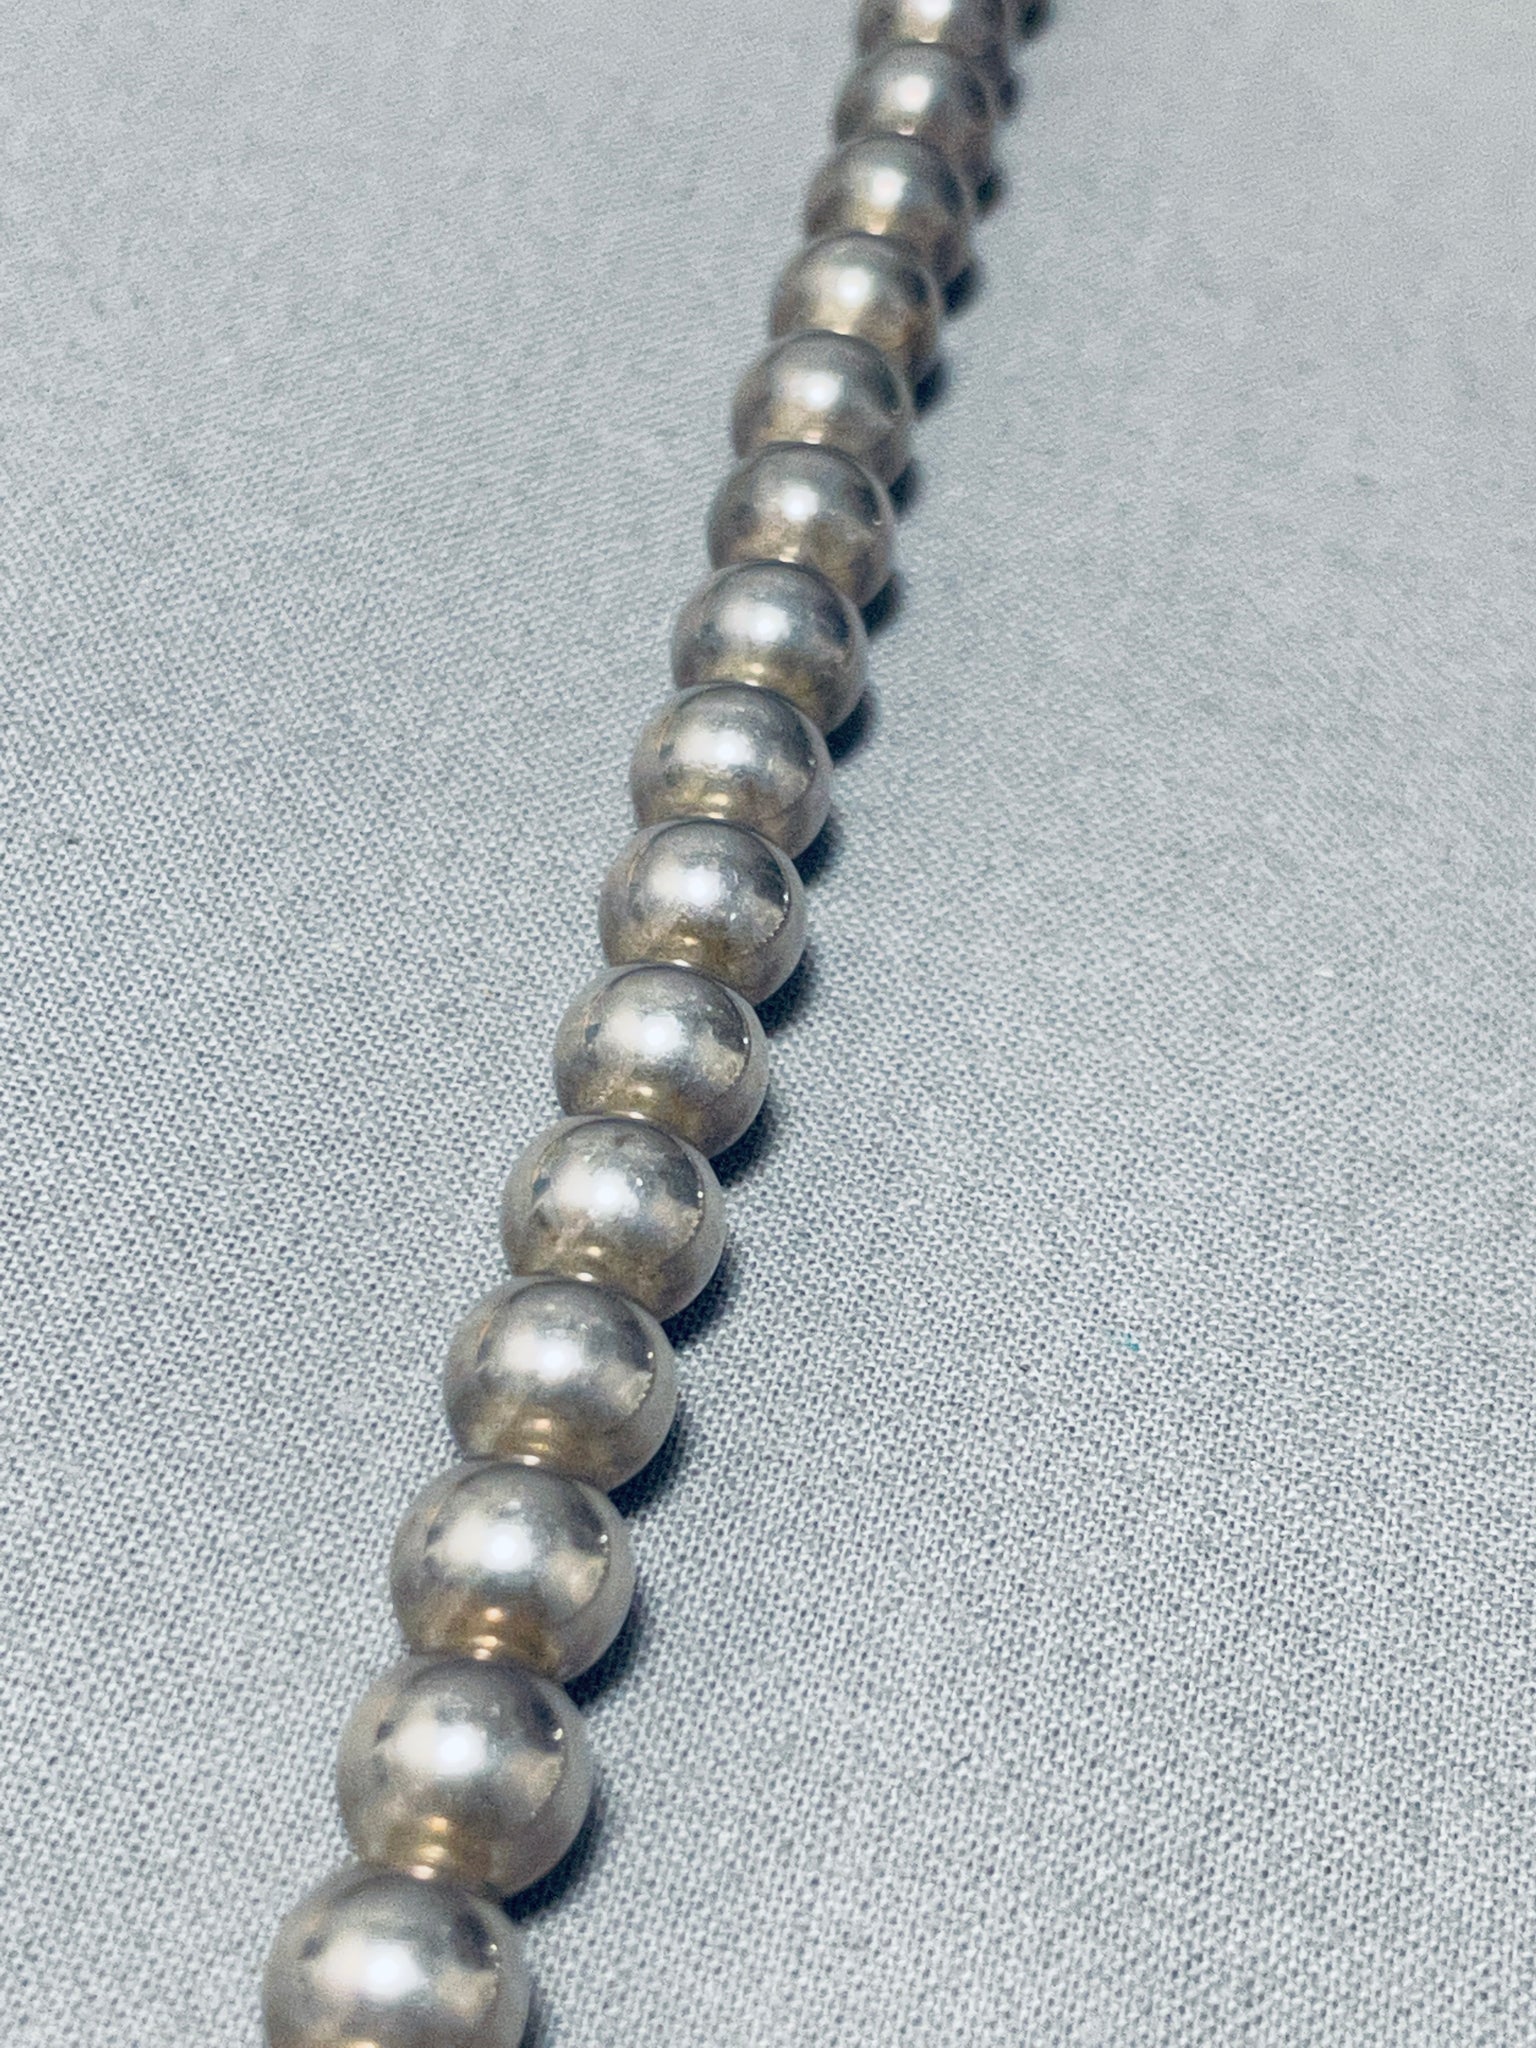 Vintage Sterling Silver Beaded Necklace 30 Inches Long